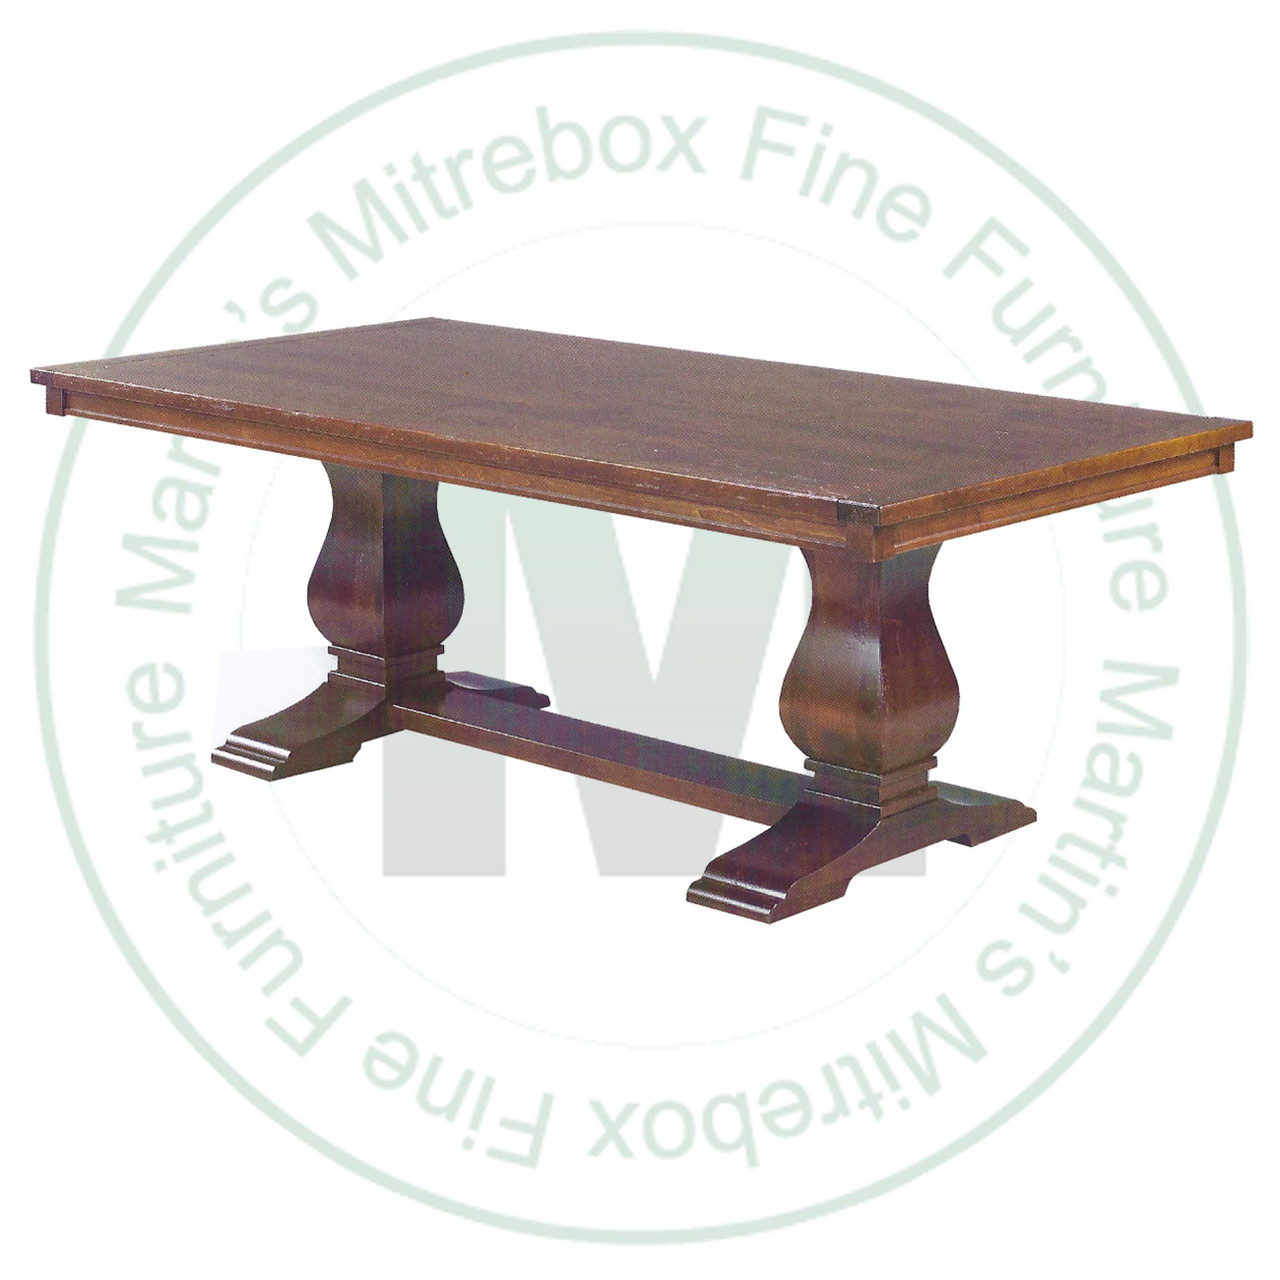 Maple Socrates Double Pedestal Table 54''D x 96''W x 30''H With 4 - 12'' Leaves. Table Has 1.25'' Thick Top